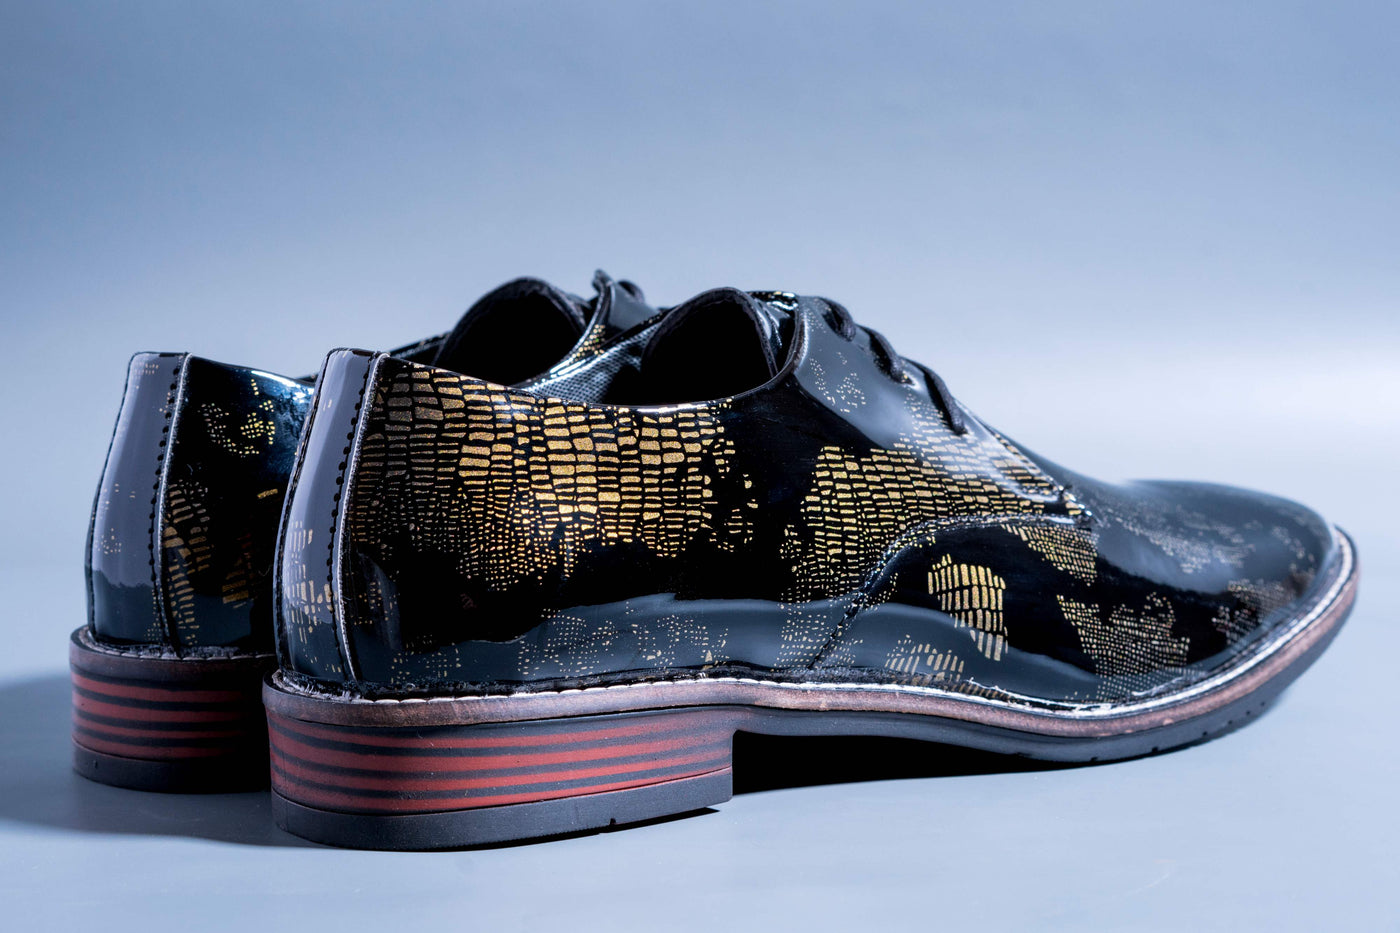 New Men's Wear Shiny Golden World Map Pattern Premium Design Quality Casual And Party Shoes -Unique and Classy